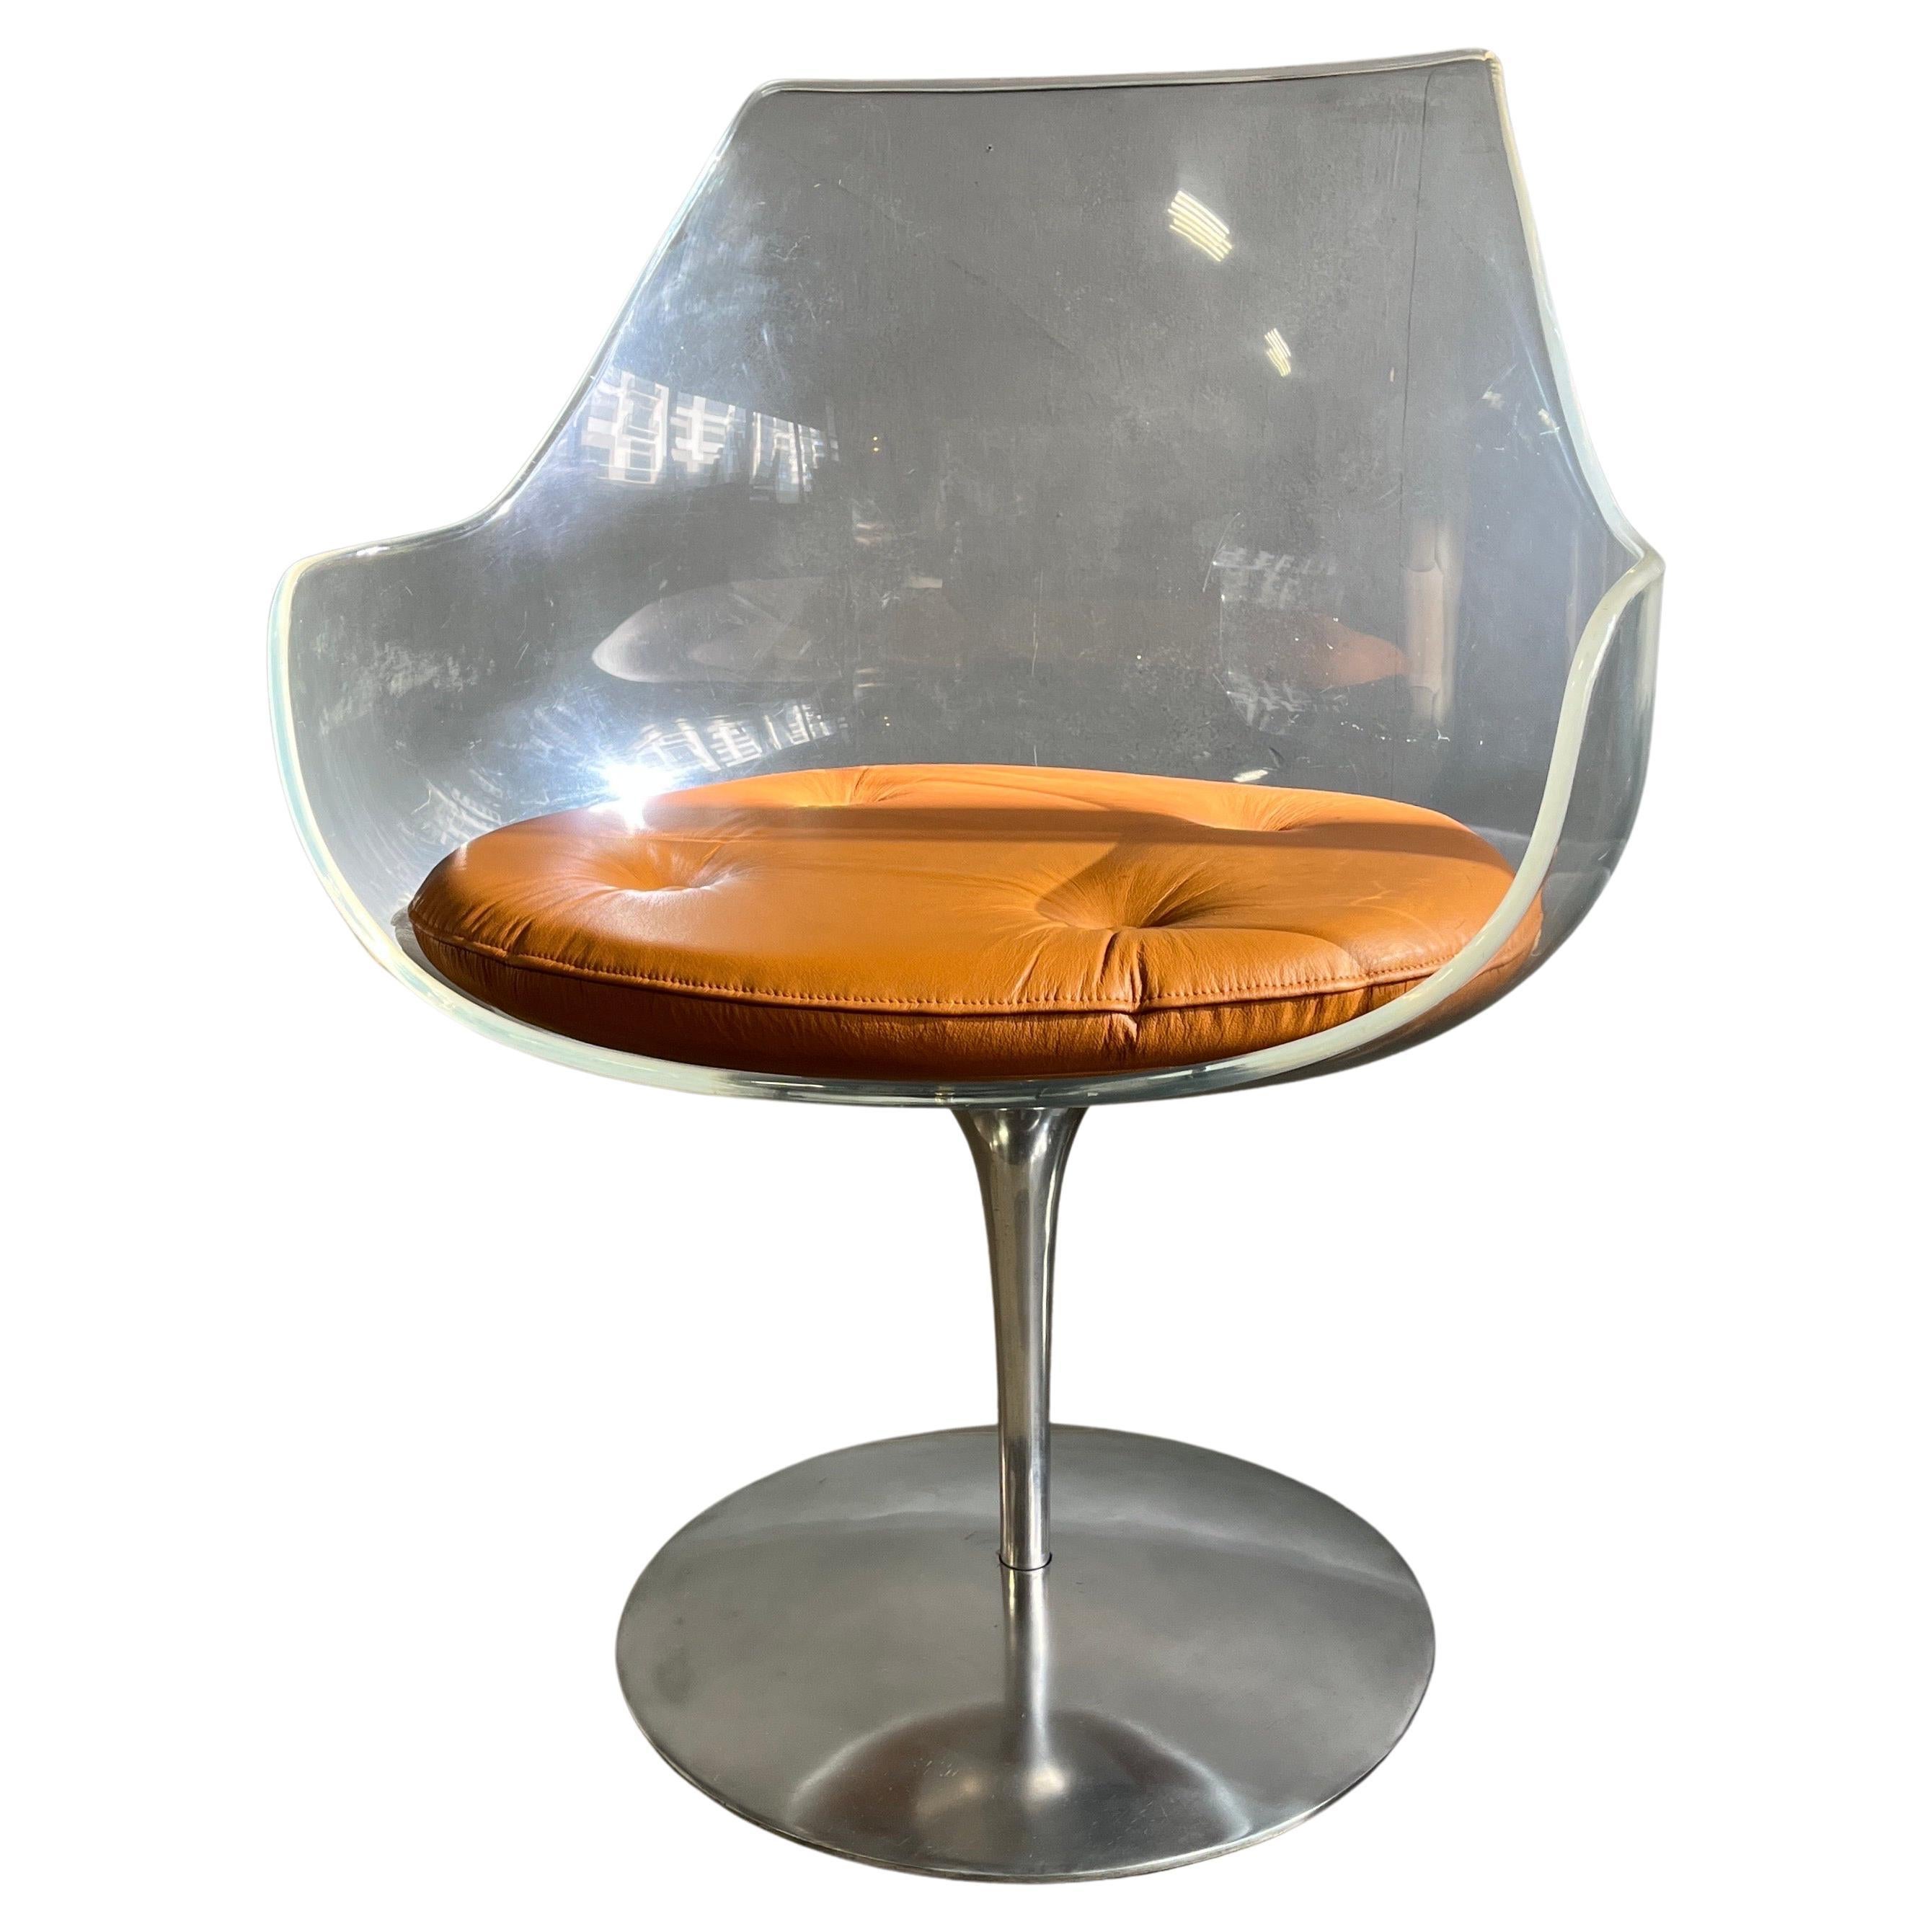 Erwine & Estelle Laverne invisible series Lucite and polished aluminum Champagne swivel chair. New leather cushions. Rare, clean early examples. 

Fully signed on bottom: Laverne, NY-22, chair base, #1, circa 1957-1960. Good condition.

Priced per